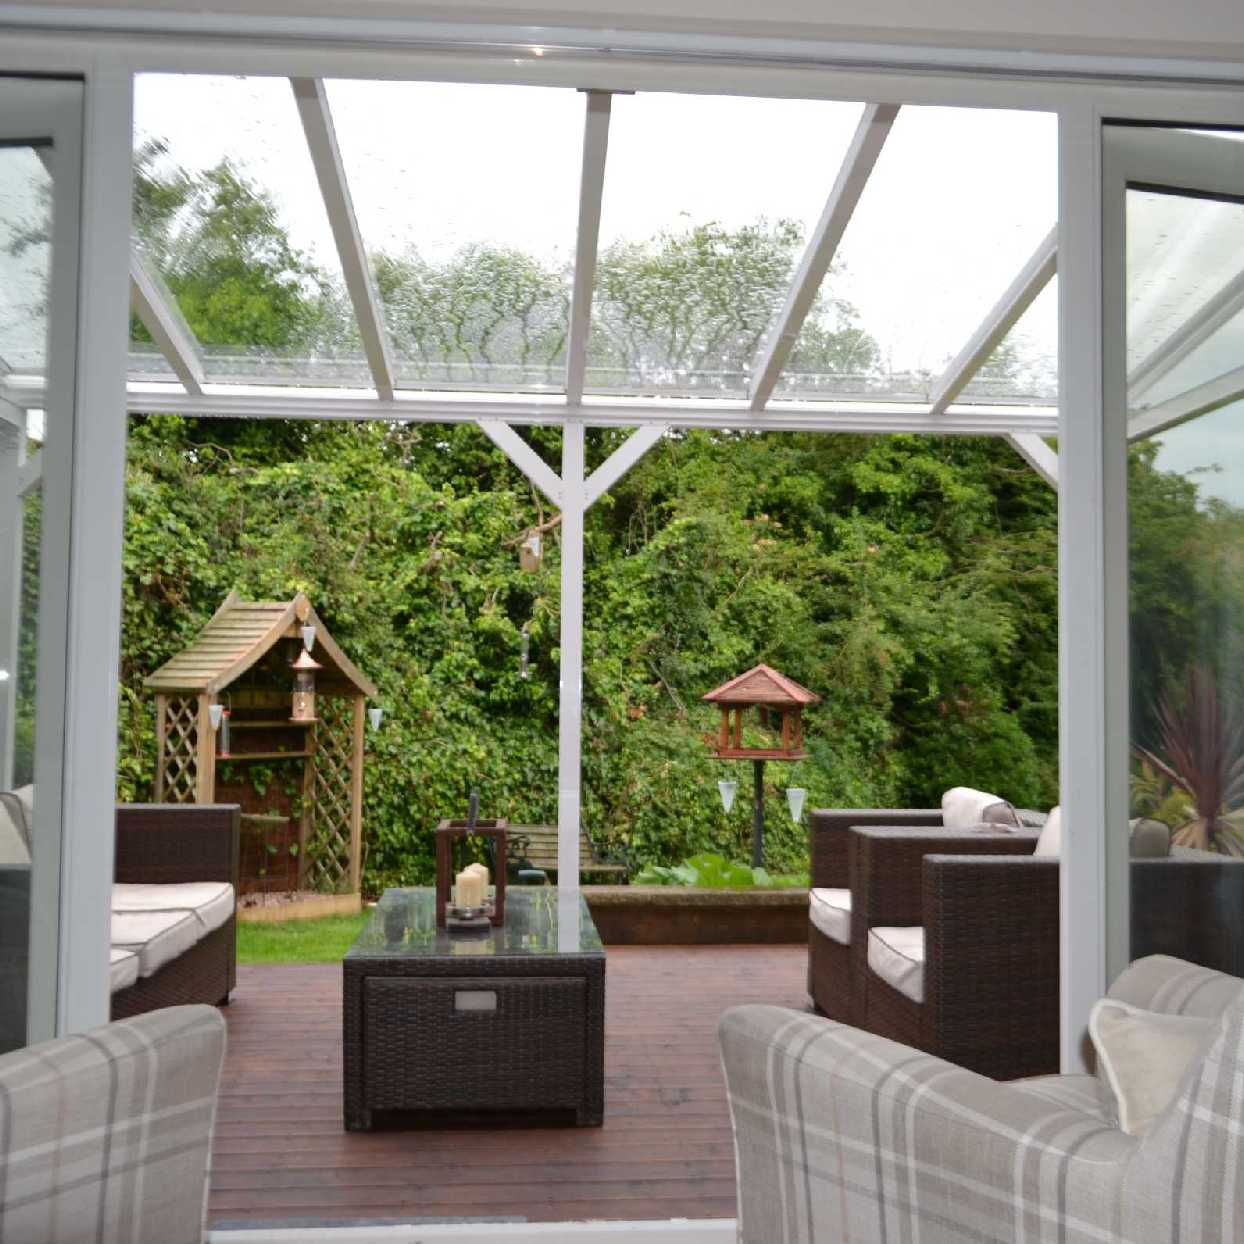 Buy Omega Smart Free-Standing, White MonoPitch Roof Canopy with 6mm Glass Clear Plate Polycarbonate Glazing - 6.3m (W) x 2.5m (P), (8) Supporting Posts online today